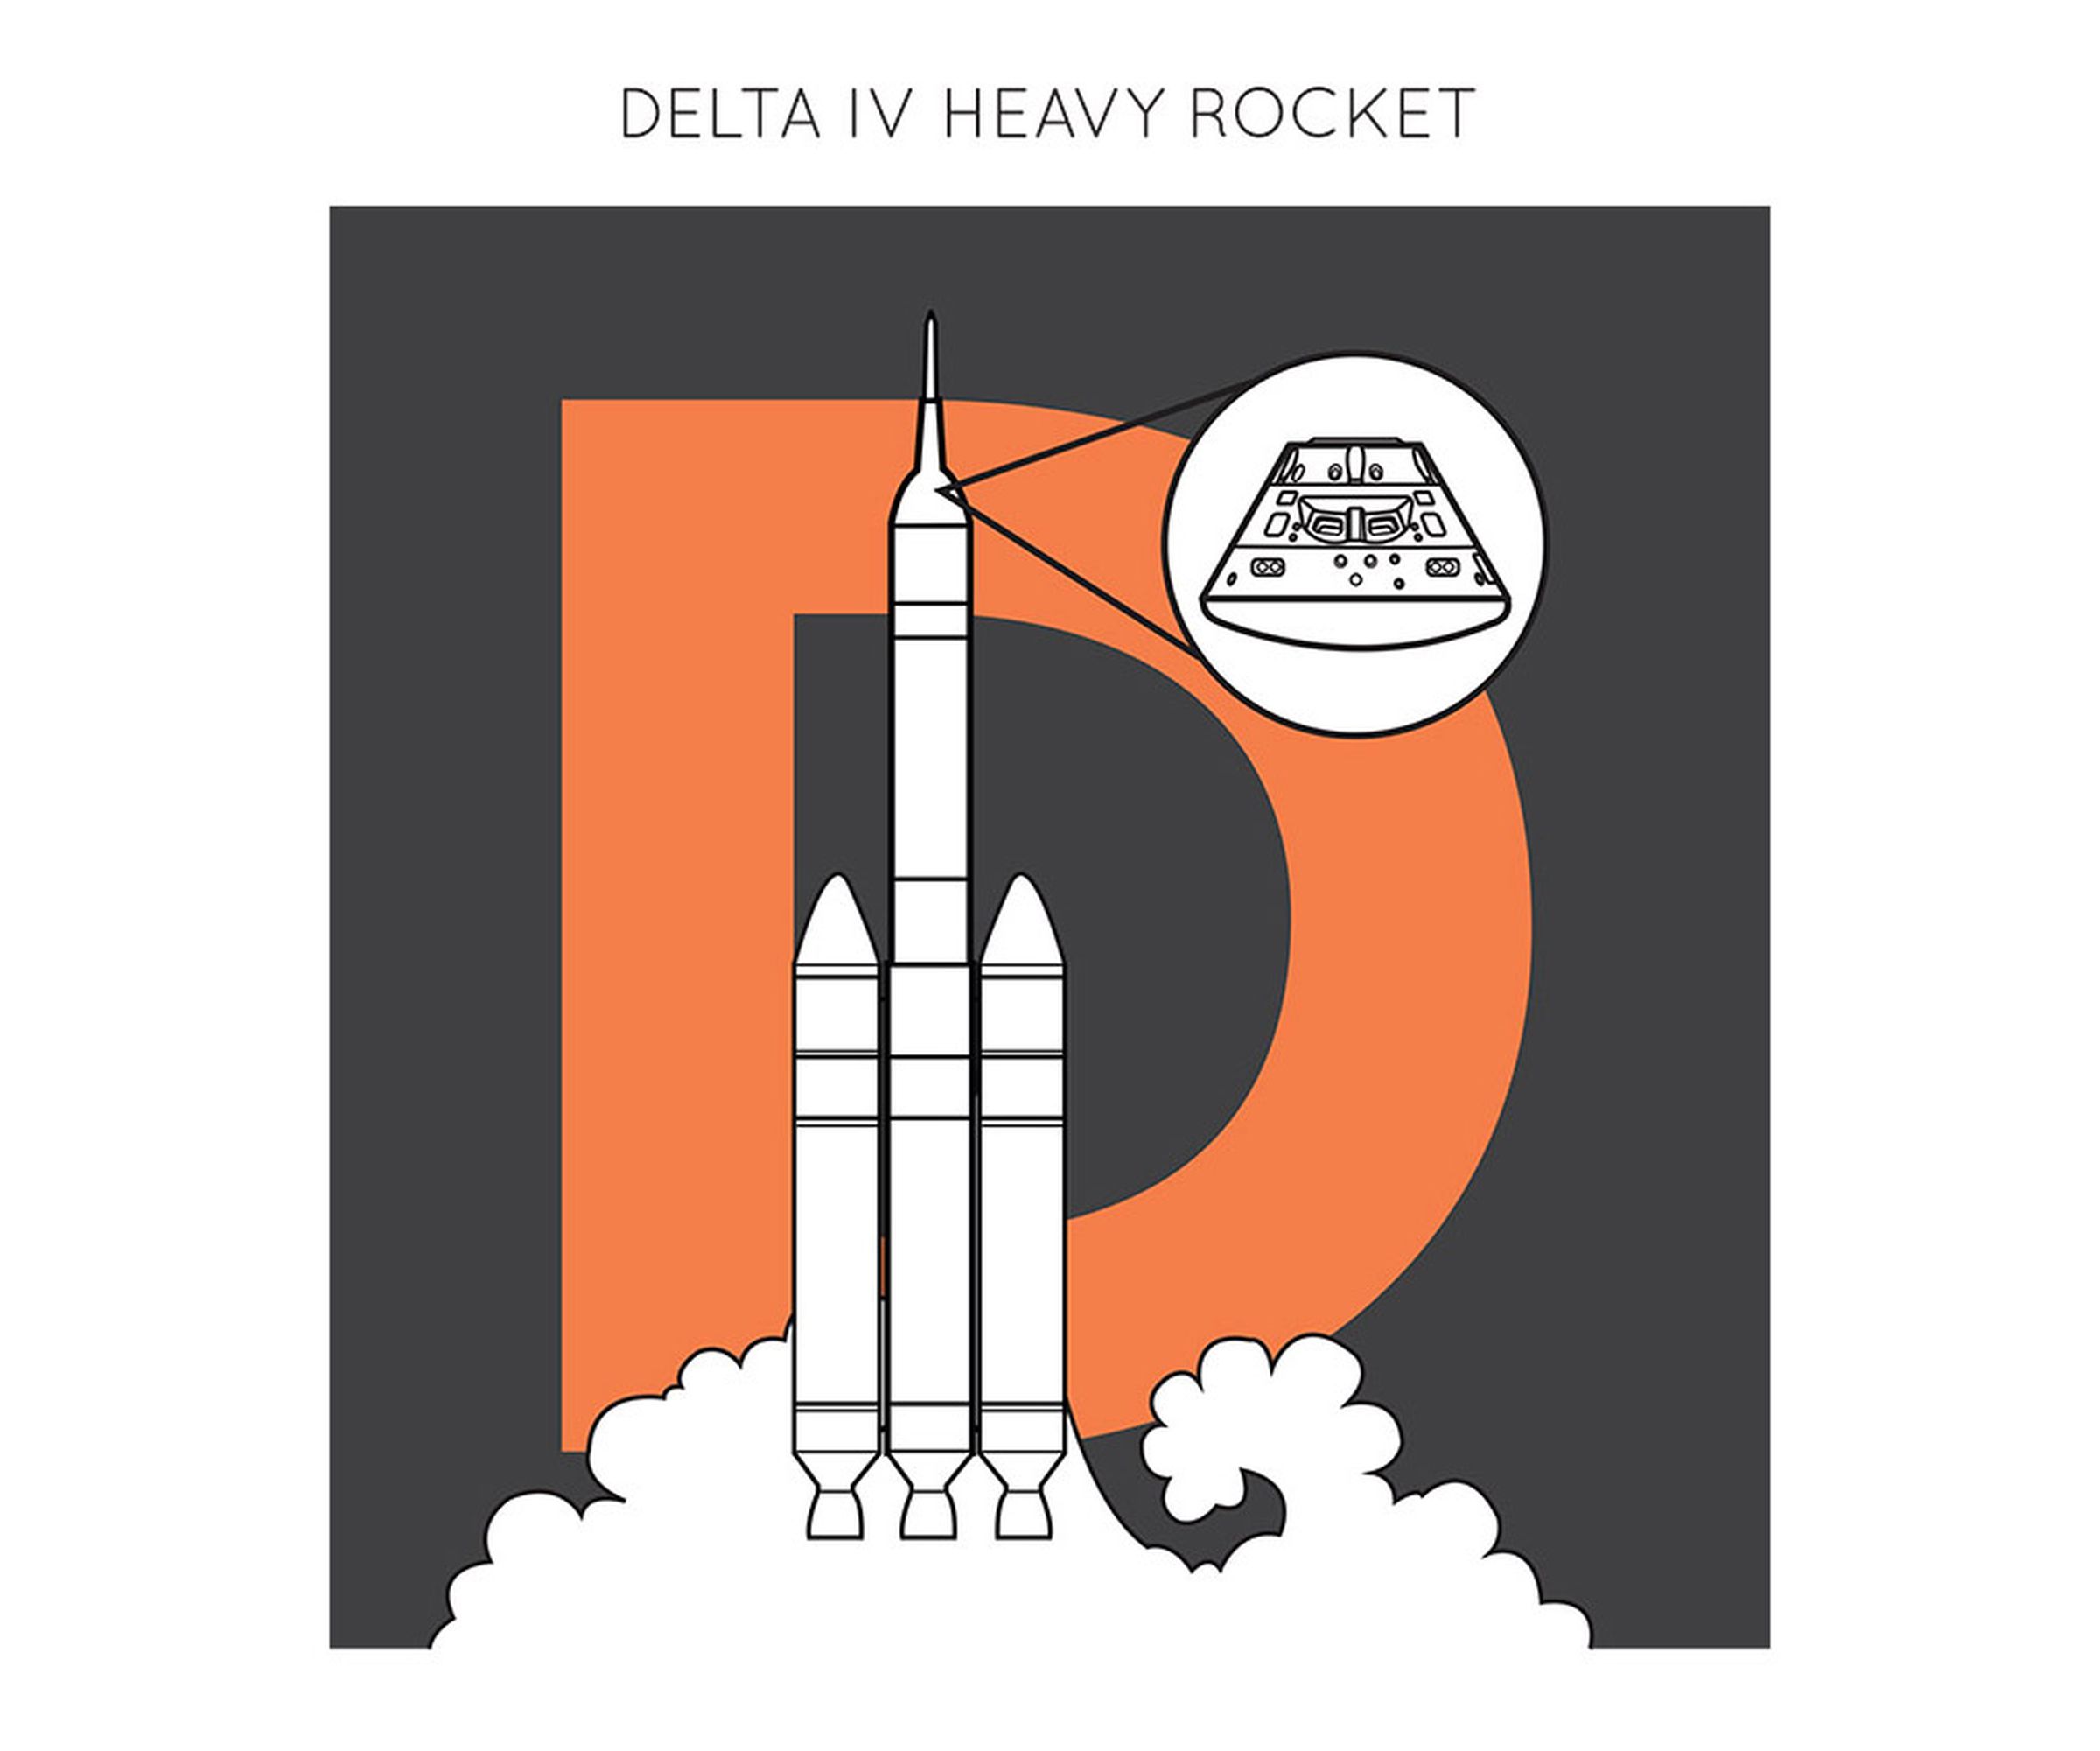 D is for Delta IV Heavy